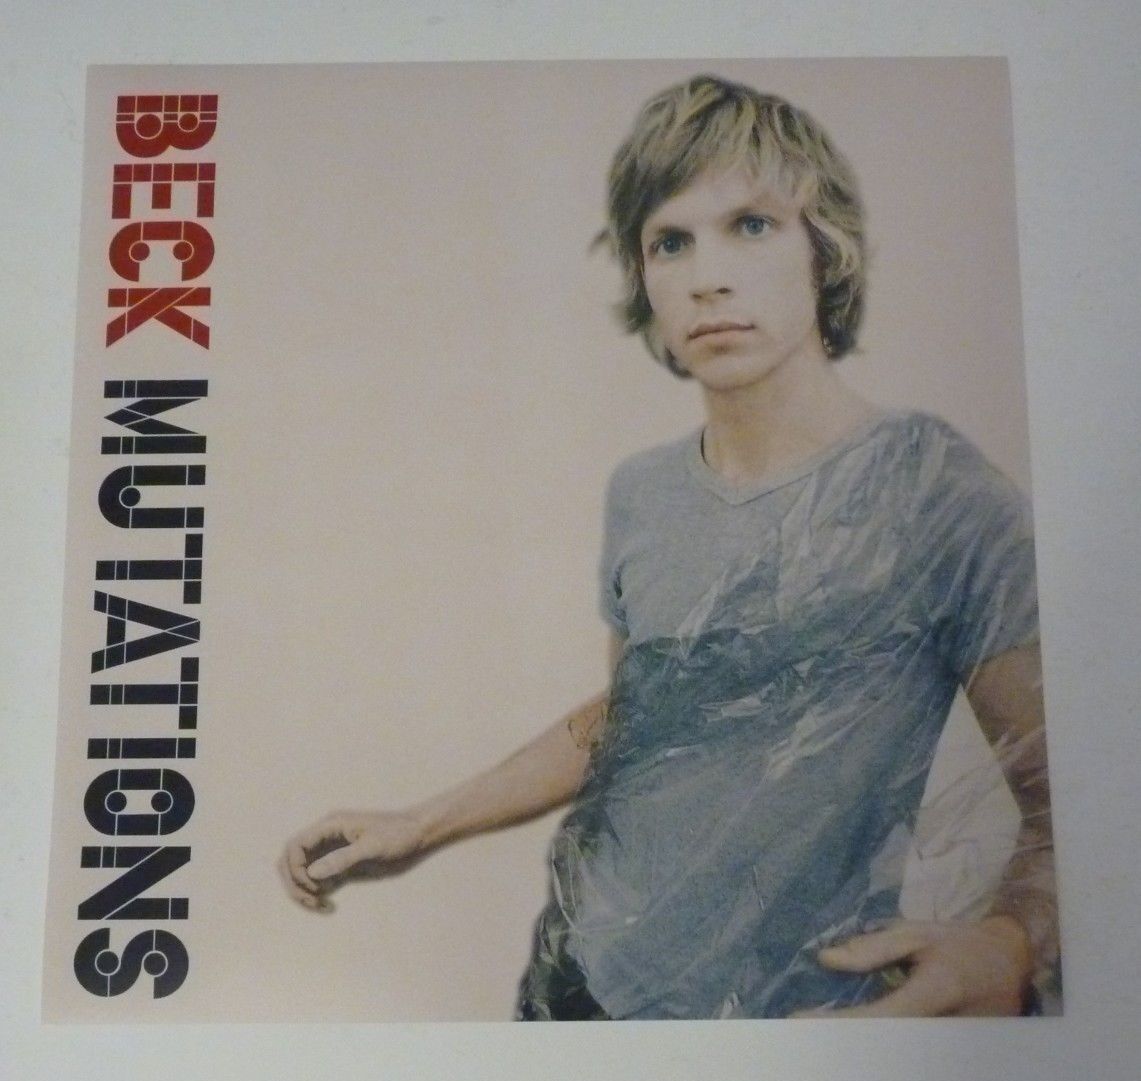 Beck Mutations LP 12x12 Album Cover Photo Poster painting